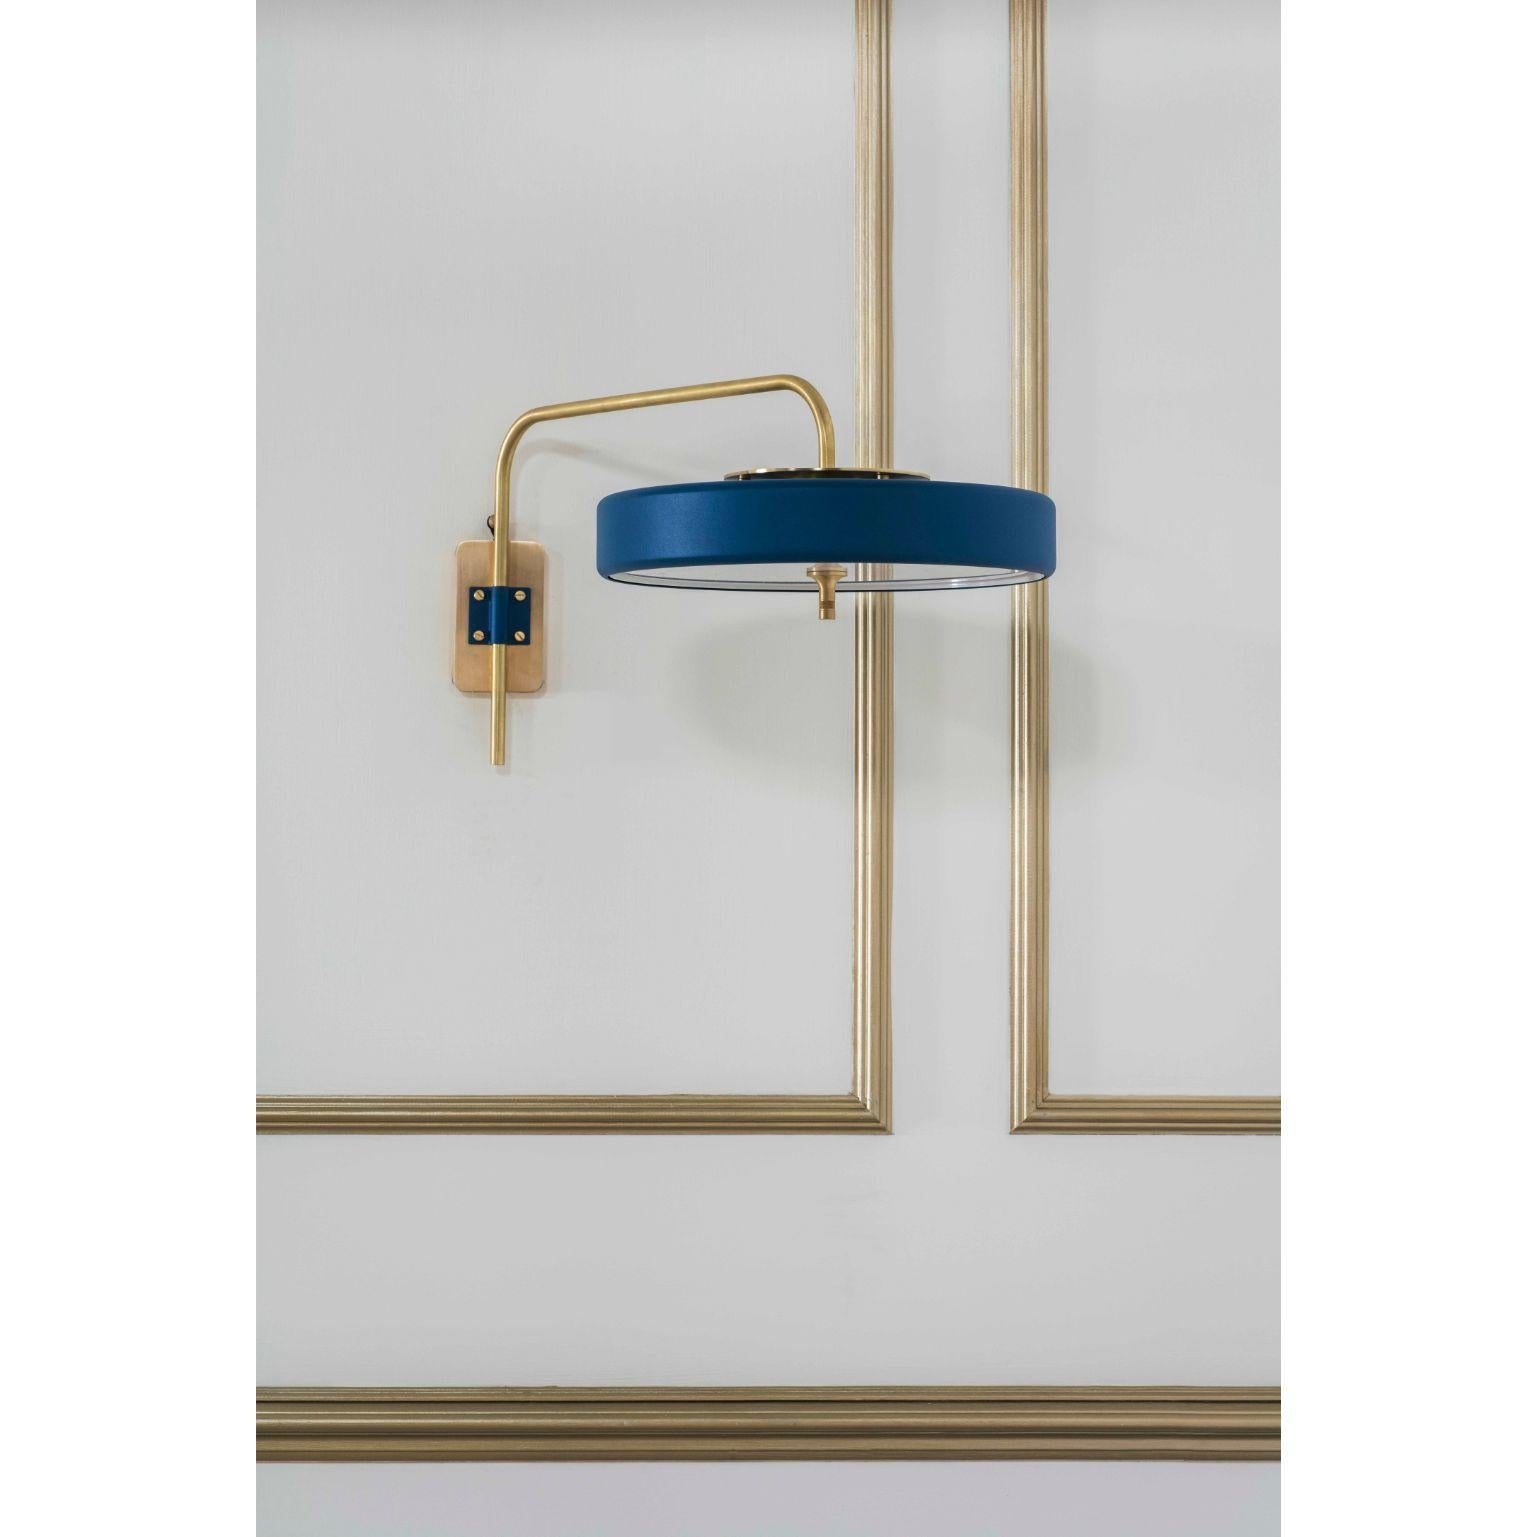 Revolve wall light - brushed brass - blue by Bert Frank
Dimensions: 31 x 63 x 35 cm
Materials: Brass, steel

Available in polished brass

Flush-fitting opal glass shade with central dome of polished marble – white Carrara or green Guatemala – held